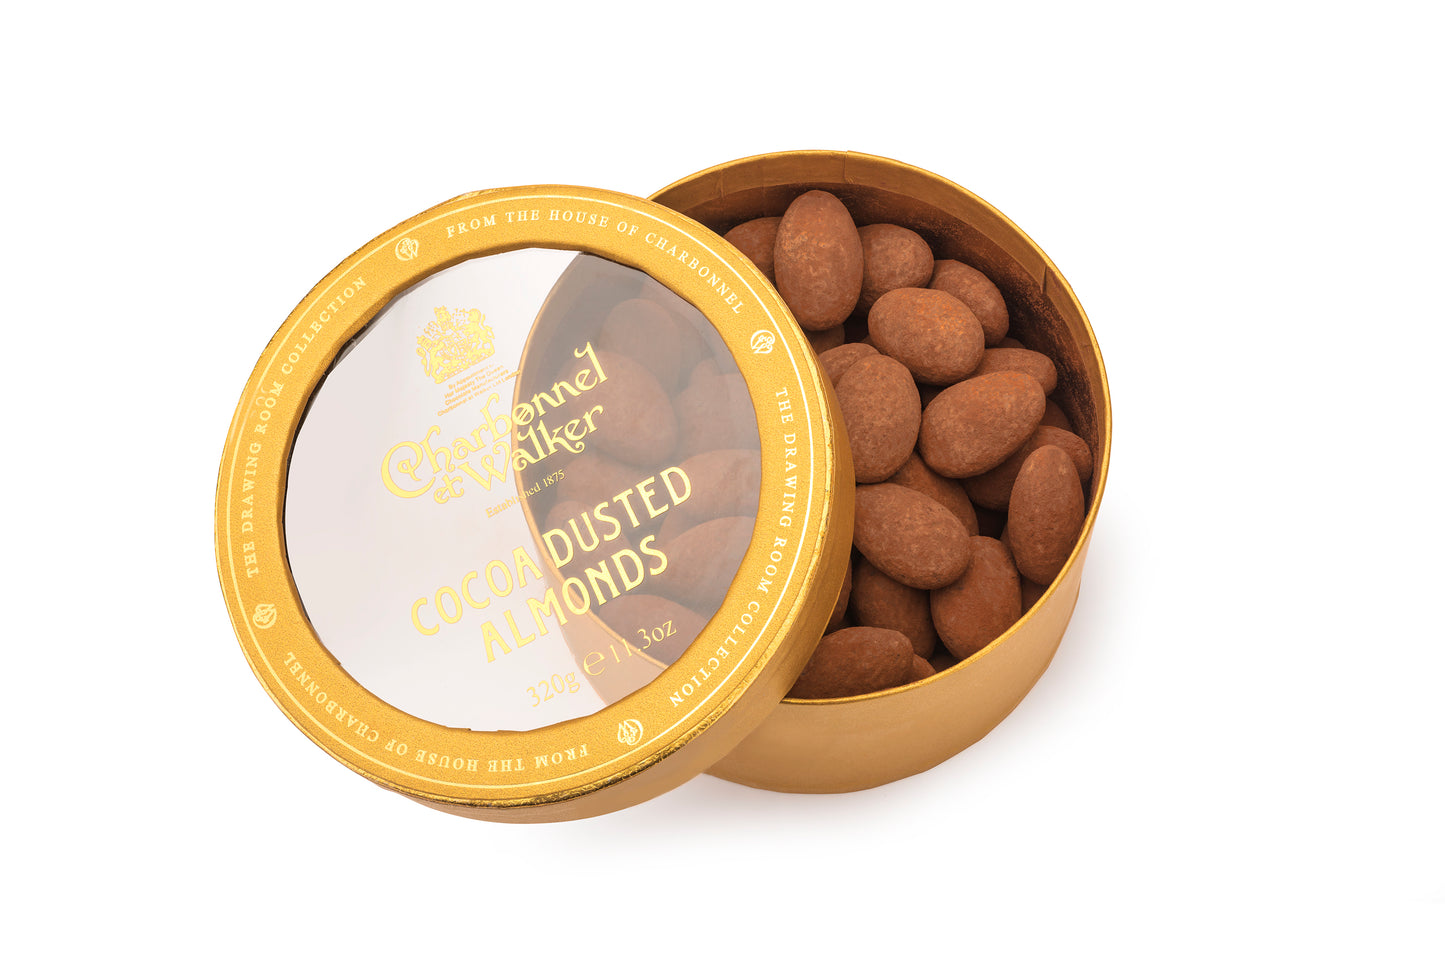 Cocoa Dusted Almonds 320g